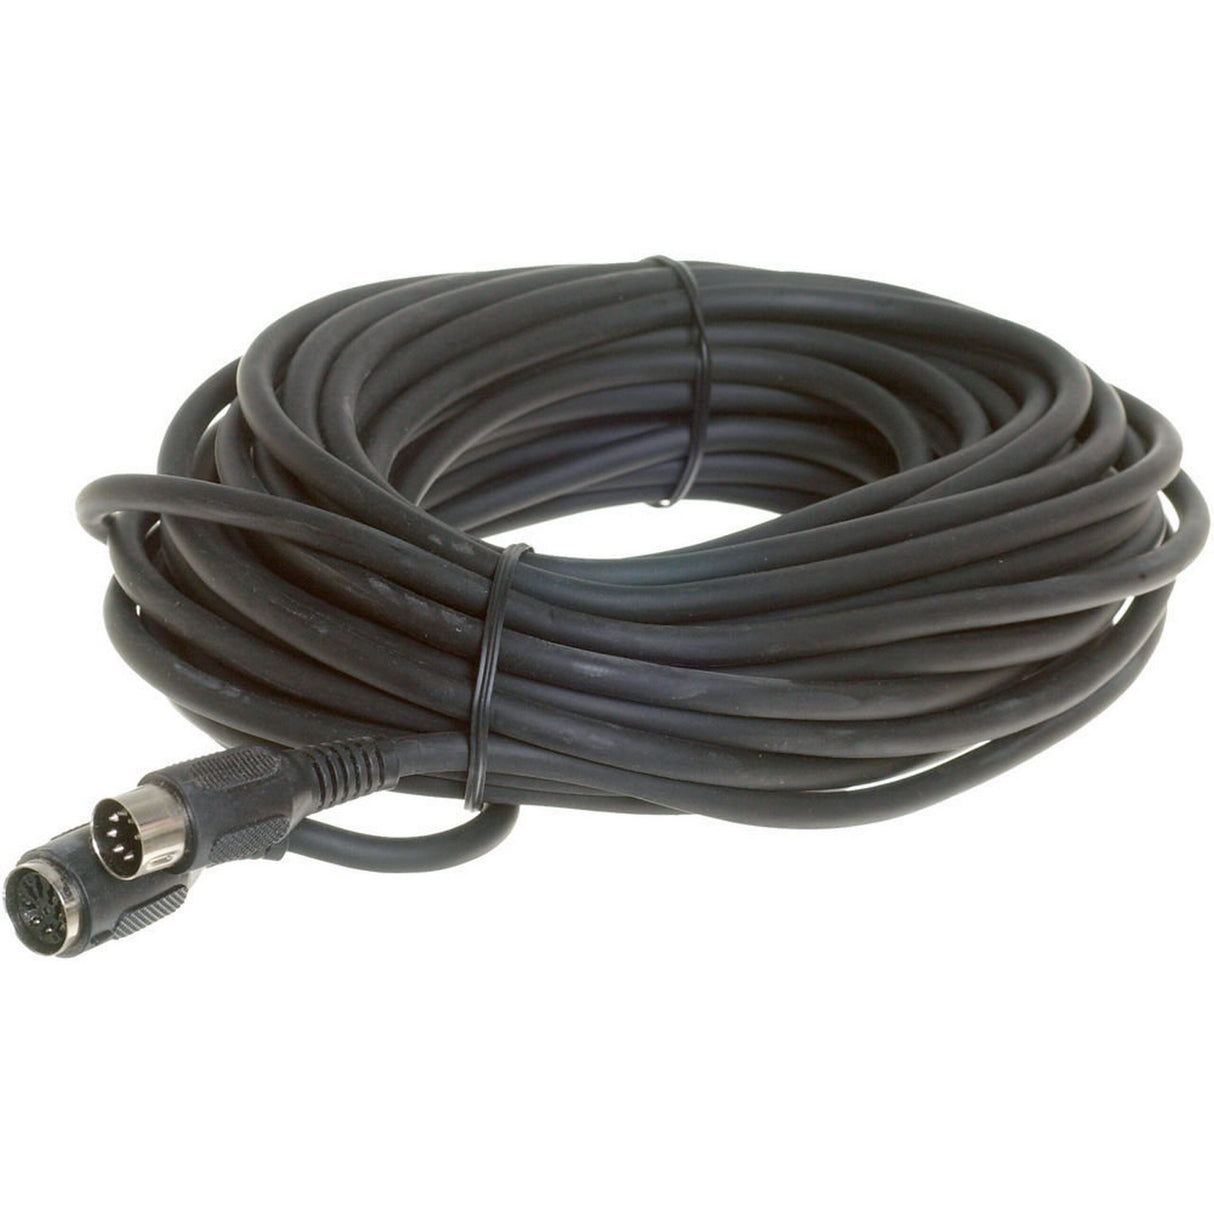 Bescor RE50 Remote Extension Cable for MP101, 50 Foot